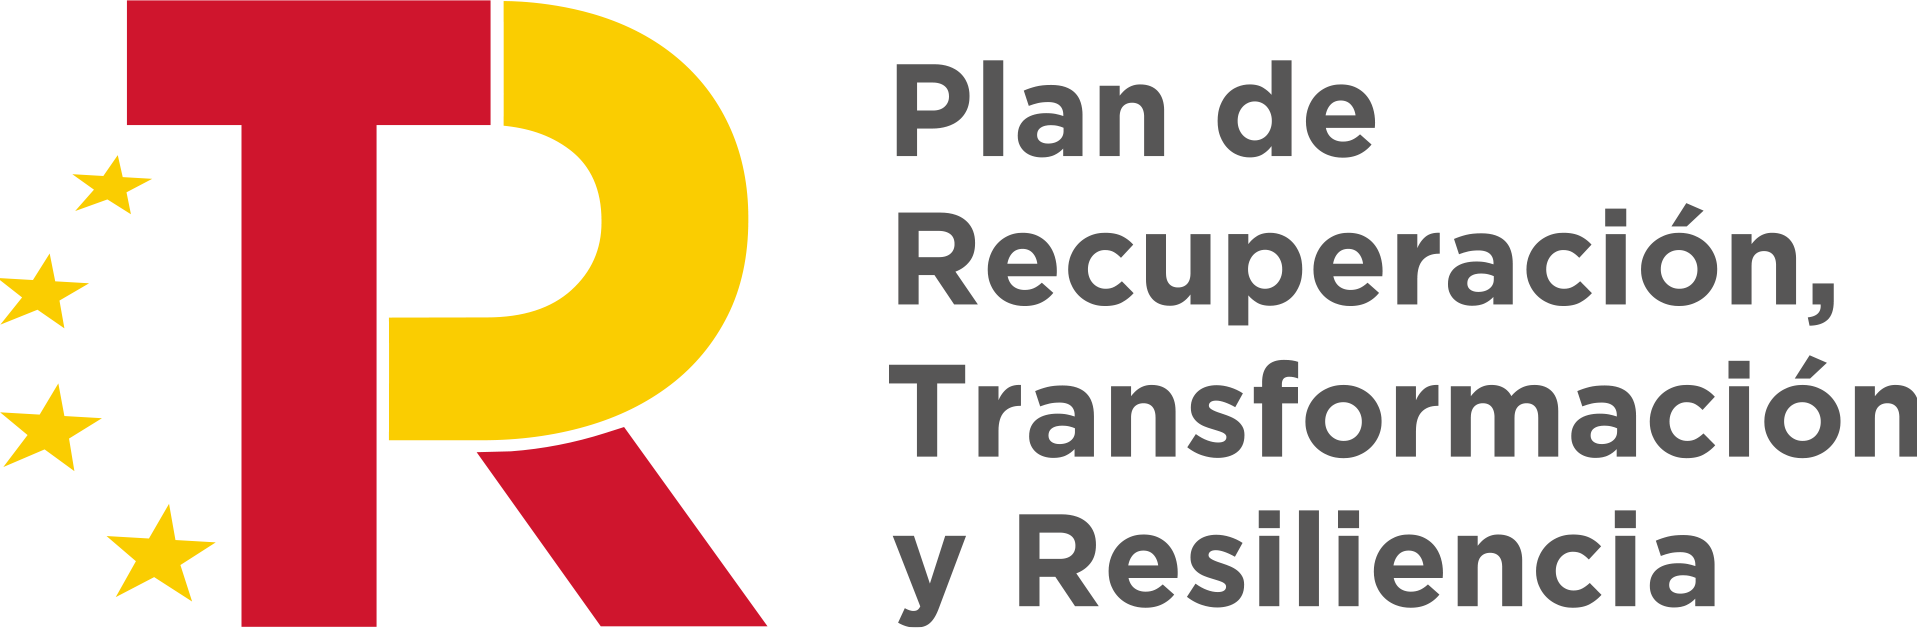 Recovery, Transformation and Resilience Plan